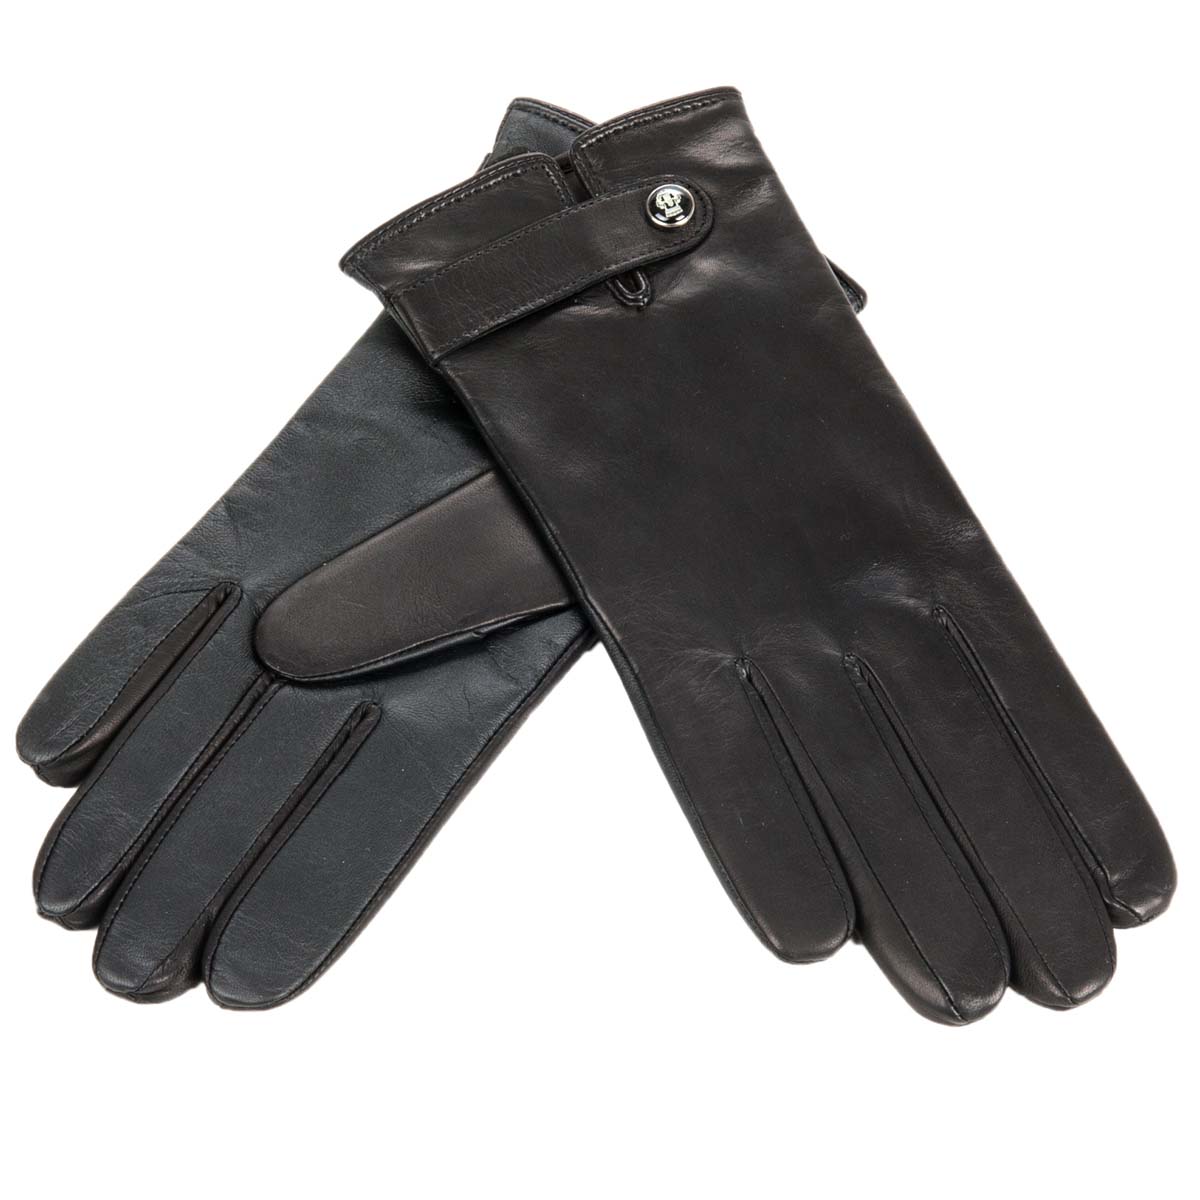 ROECKL's leather gloves for women